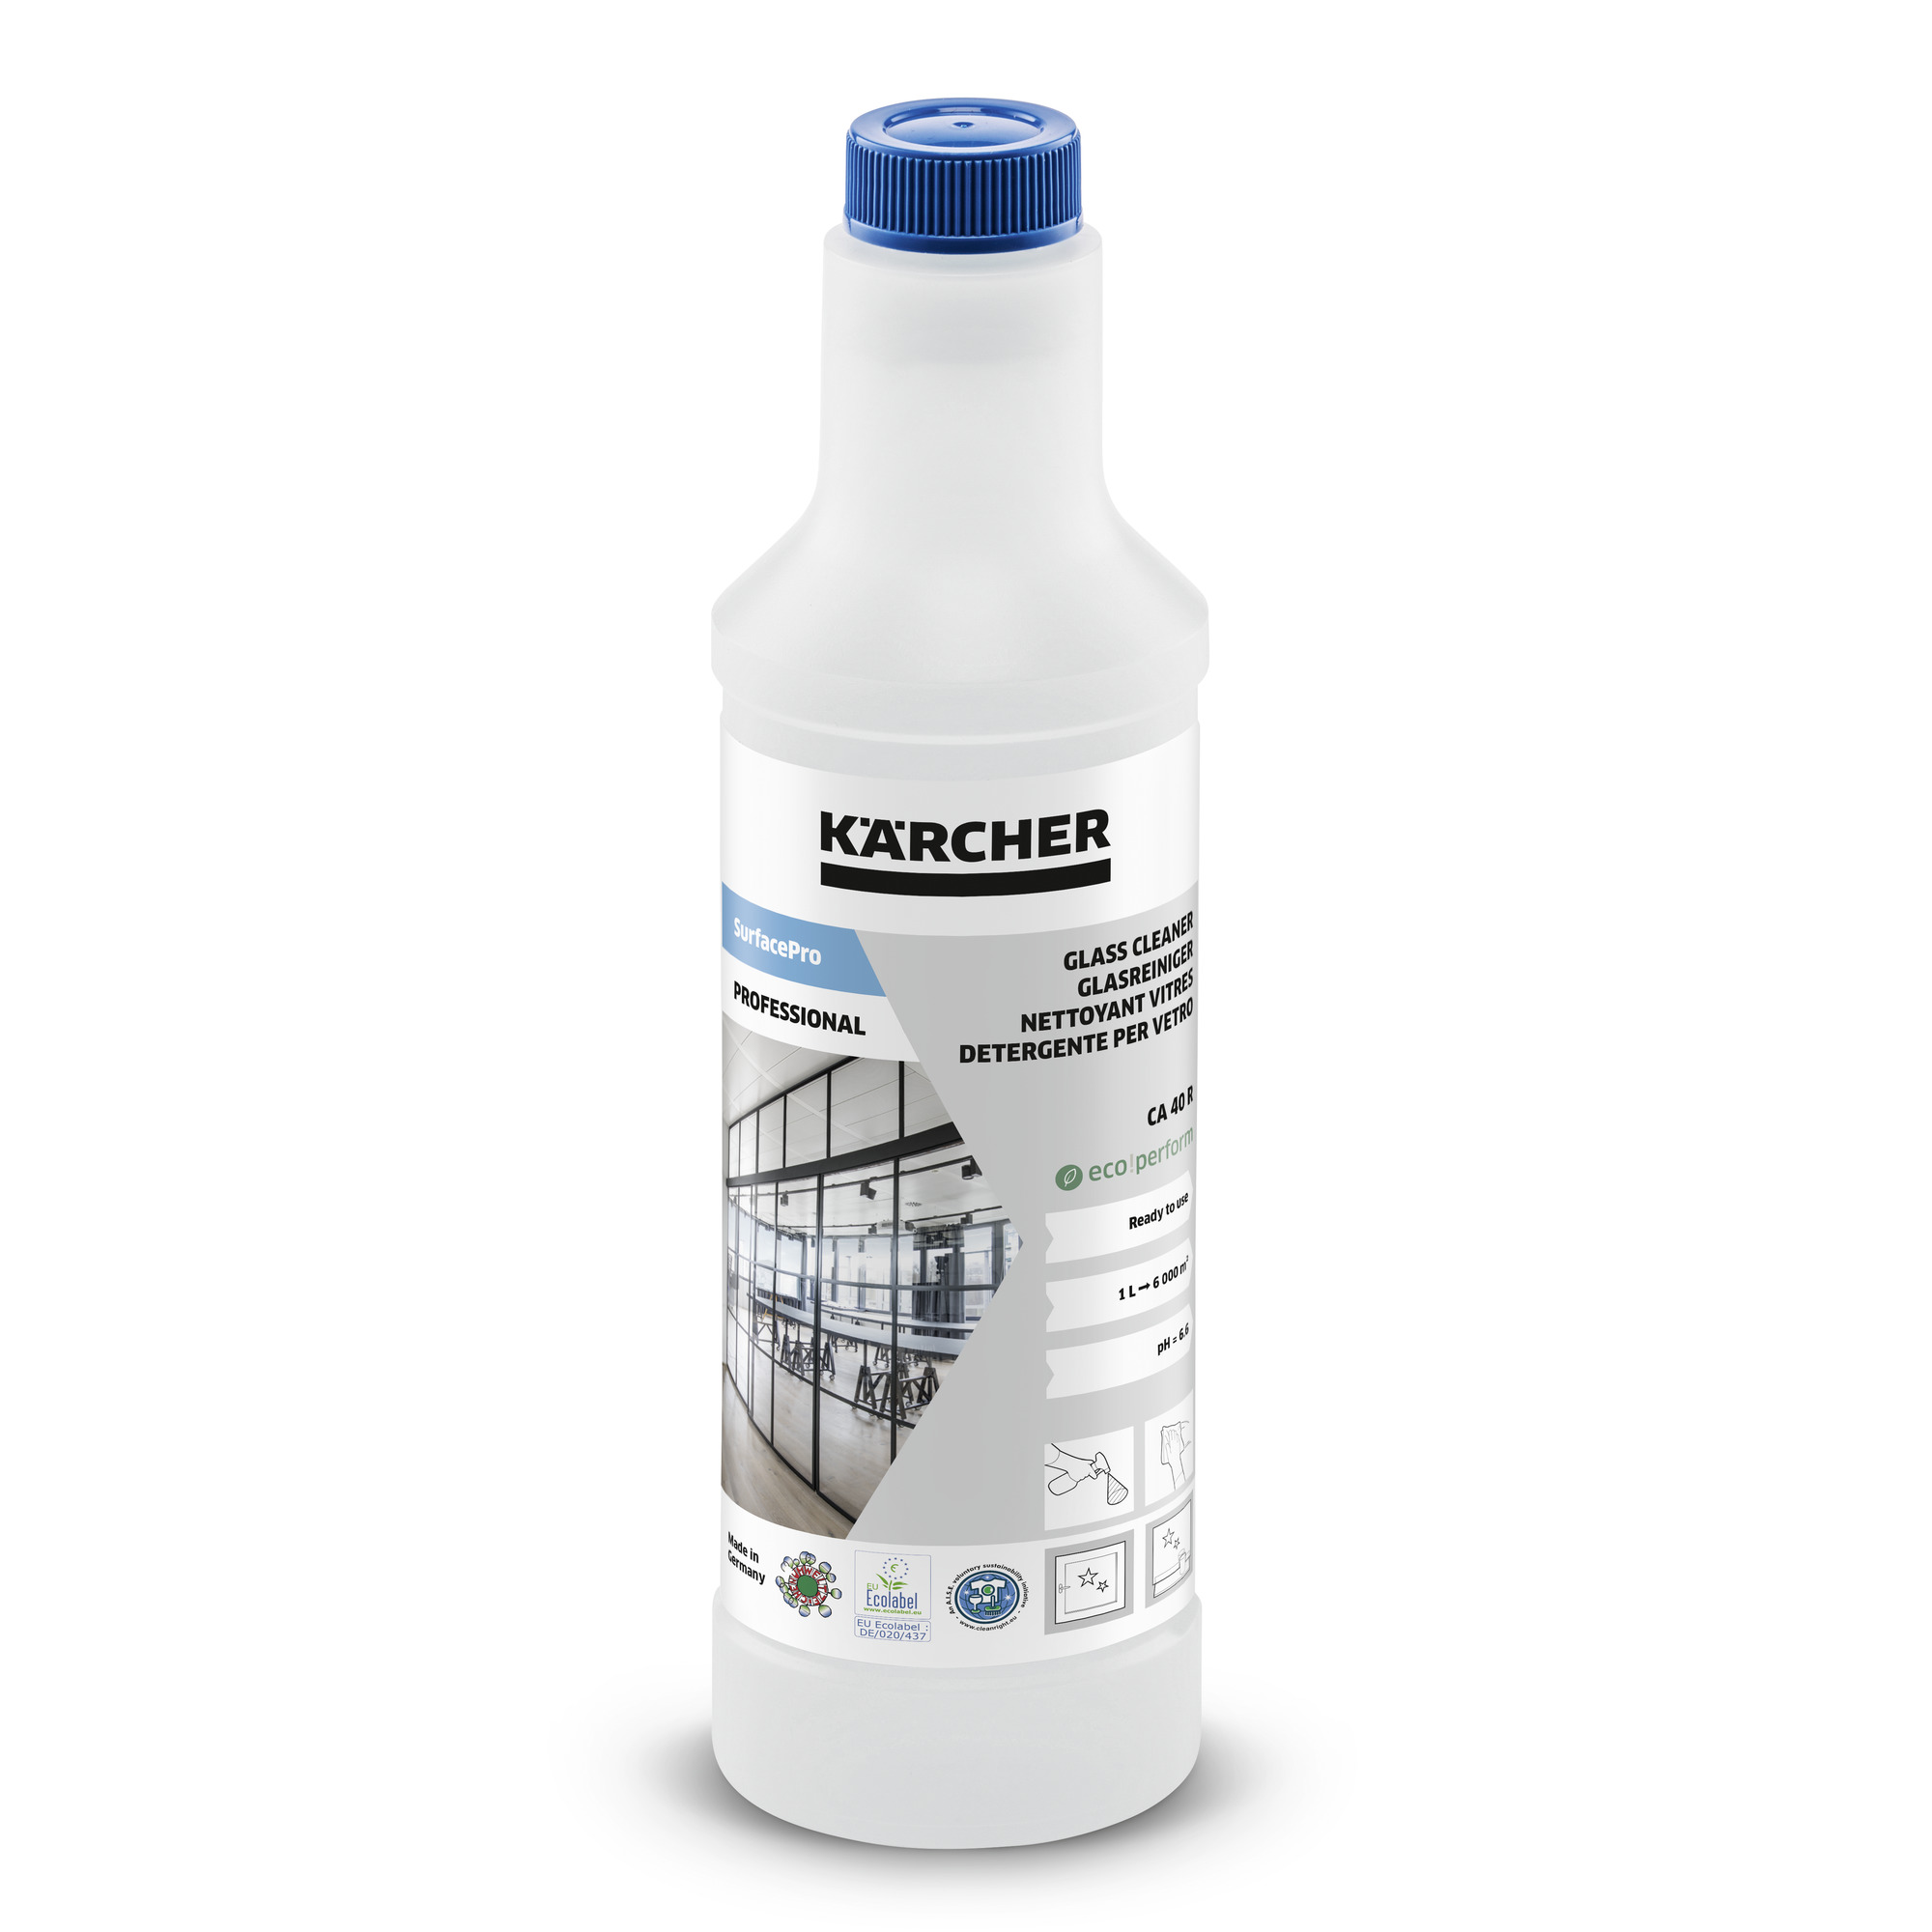 Kaercher SurfacePro Glass Cleaner CA 40 R eco!perform